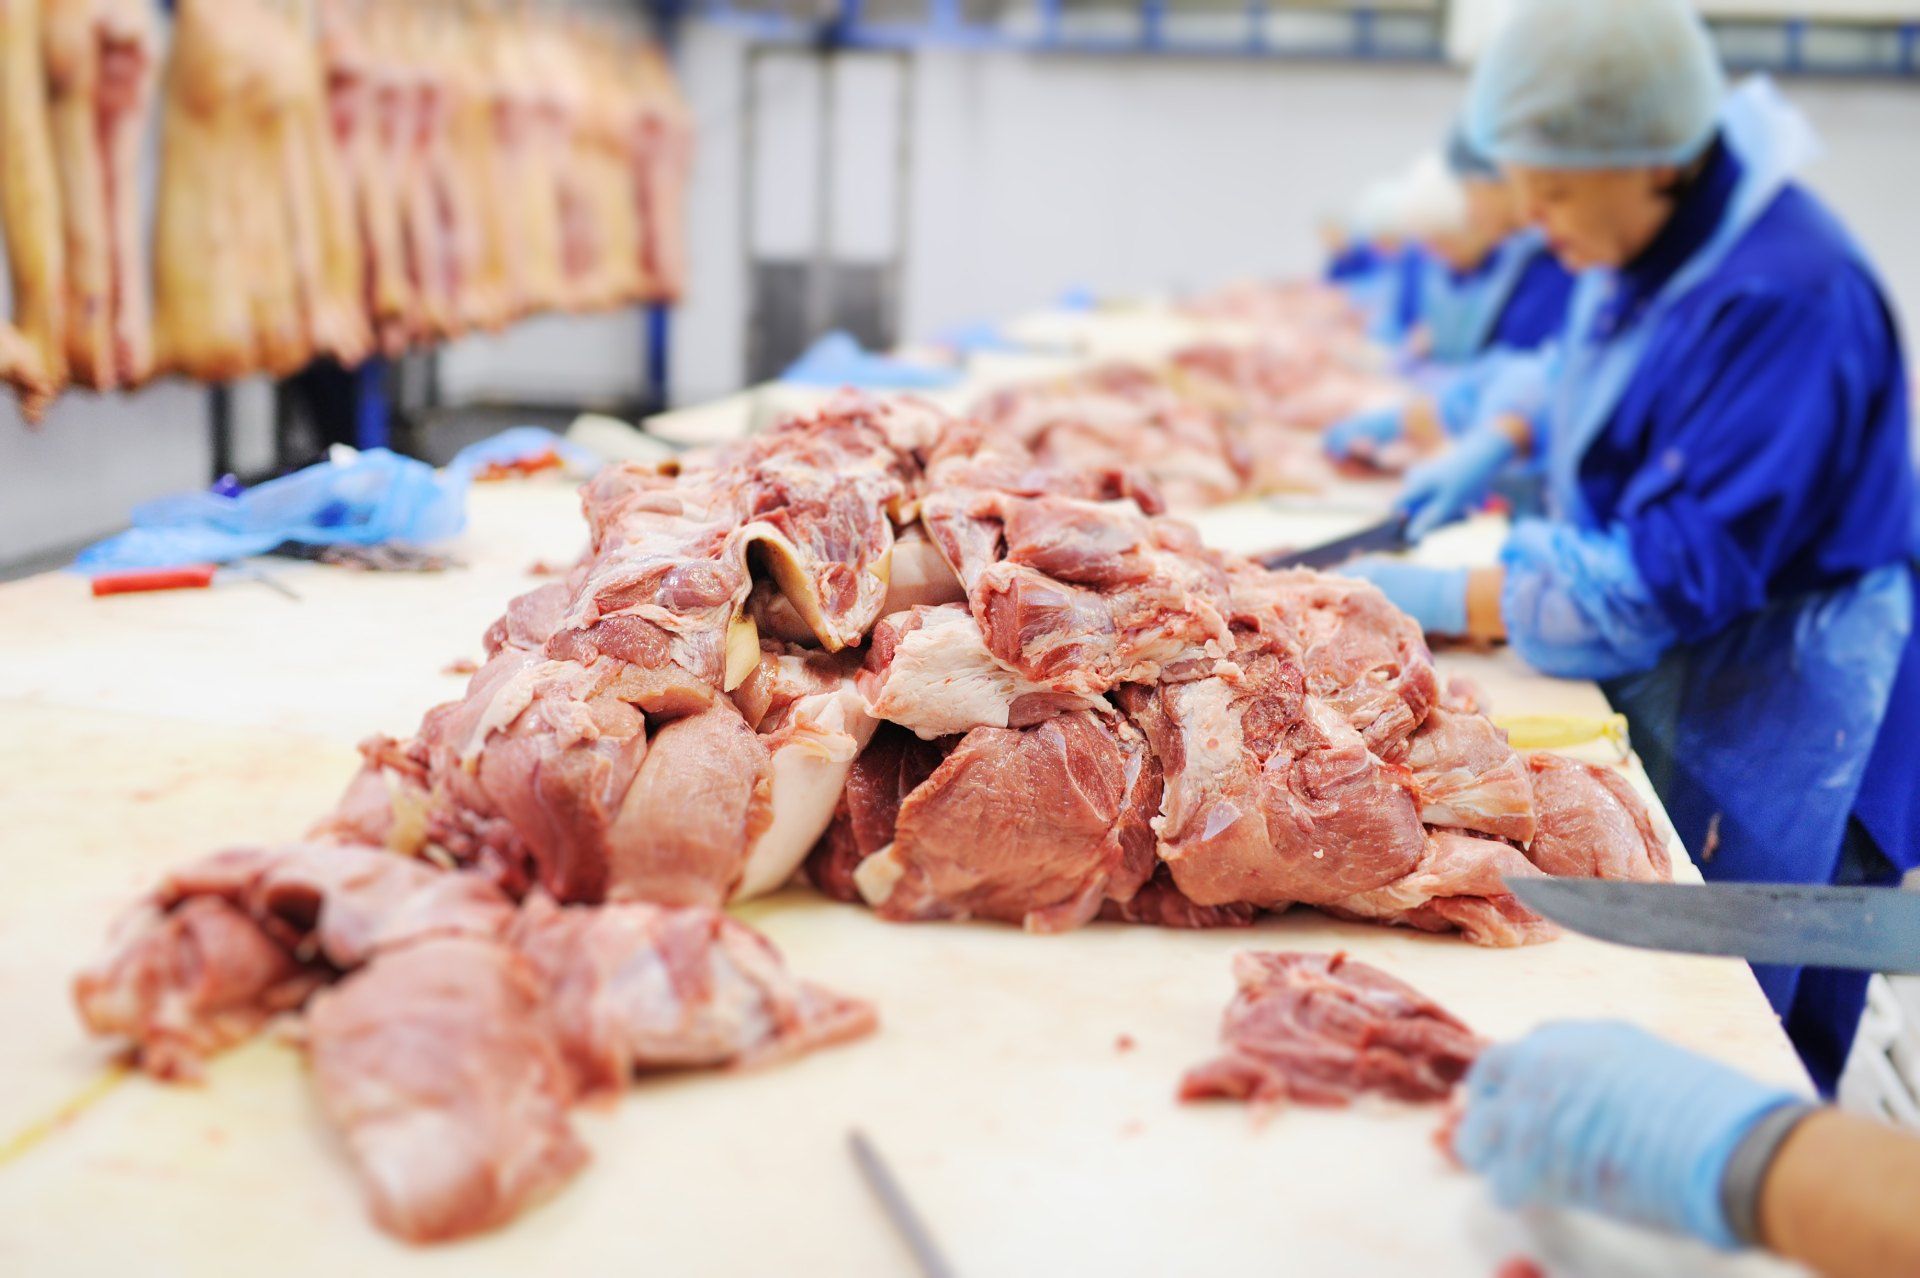 Meatpacking plant workers chop meat for packaging